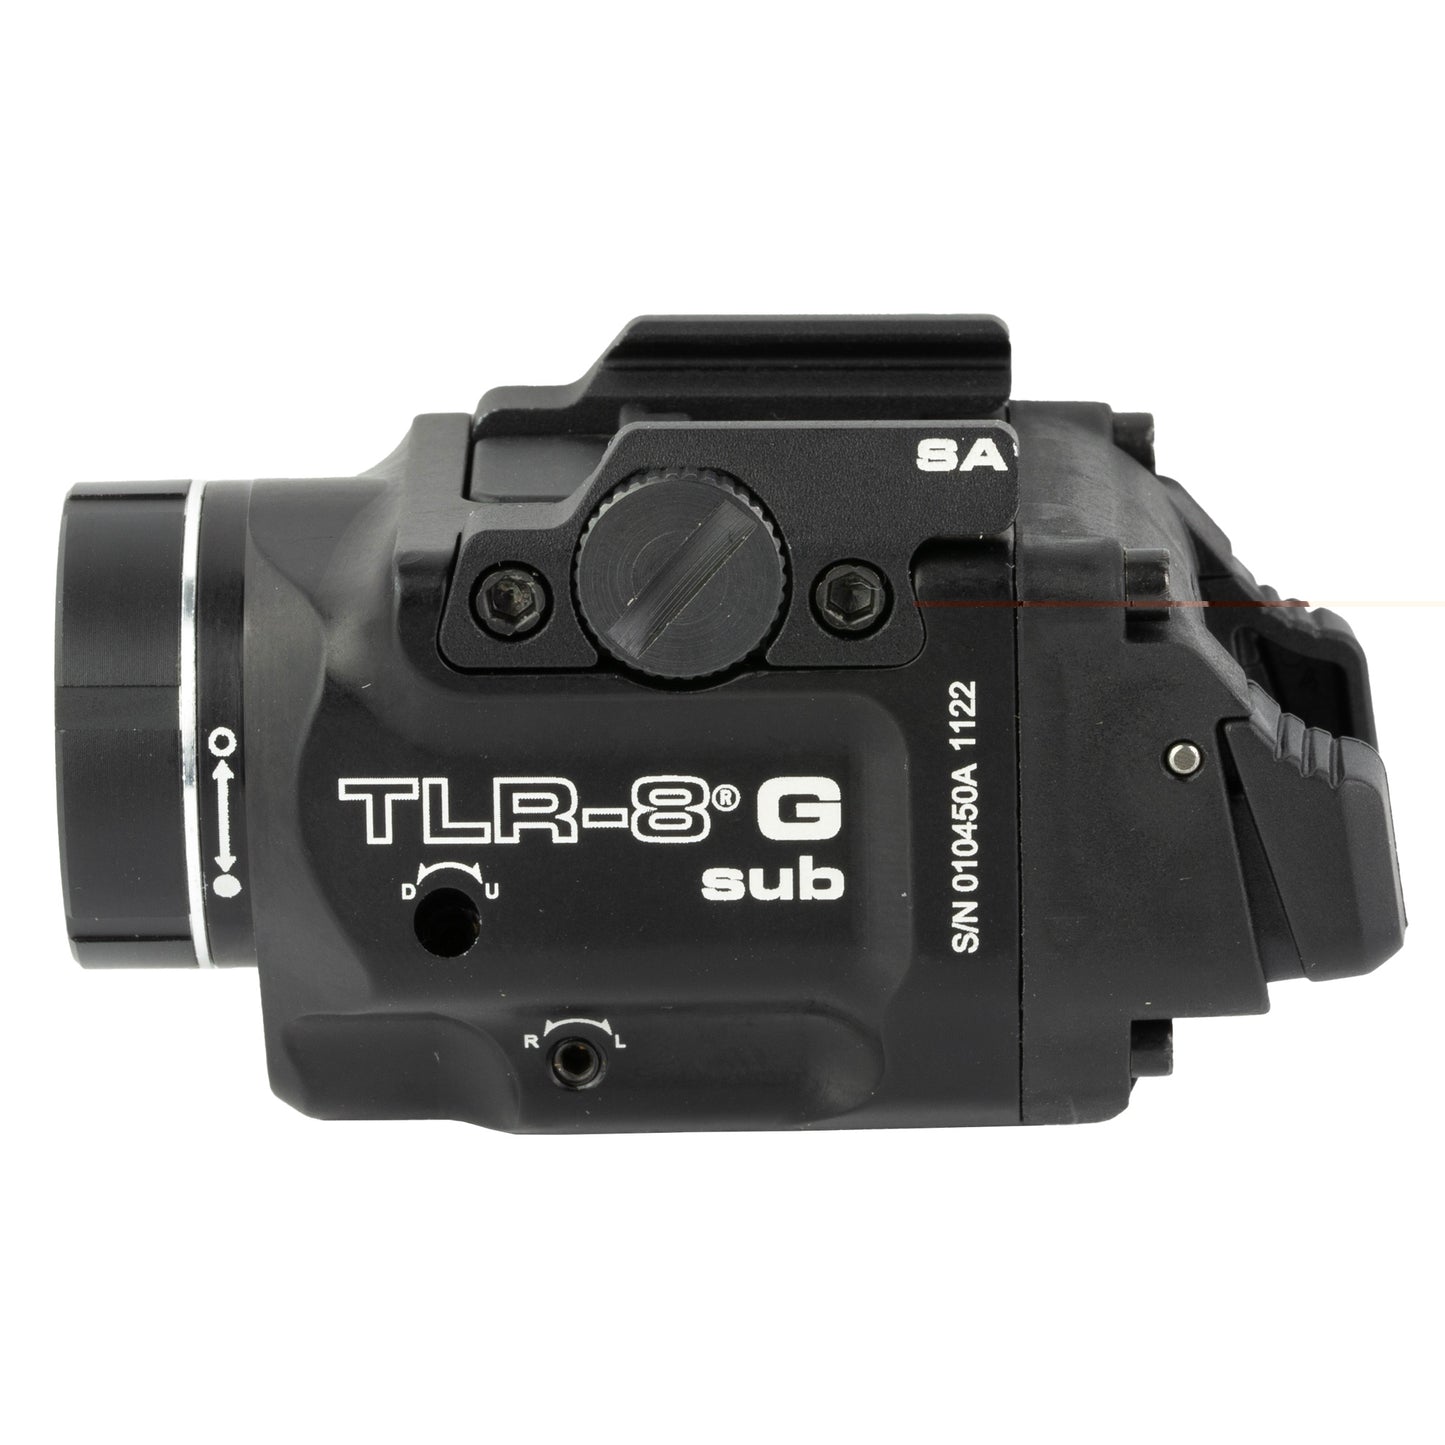 Streamlight, Streamlight TLR-8 G Sub, White LED with Green Laser, Fits Springfield Hellcat, 500 Lumens, Anodized Finish, Black, Includes (1) CR123a Battery, Low and High Switches